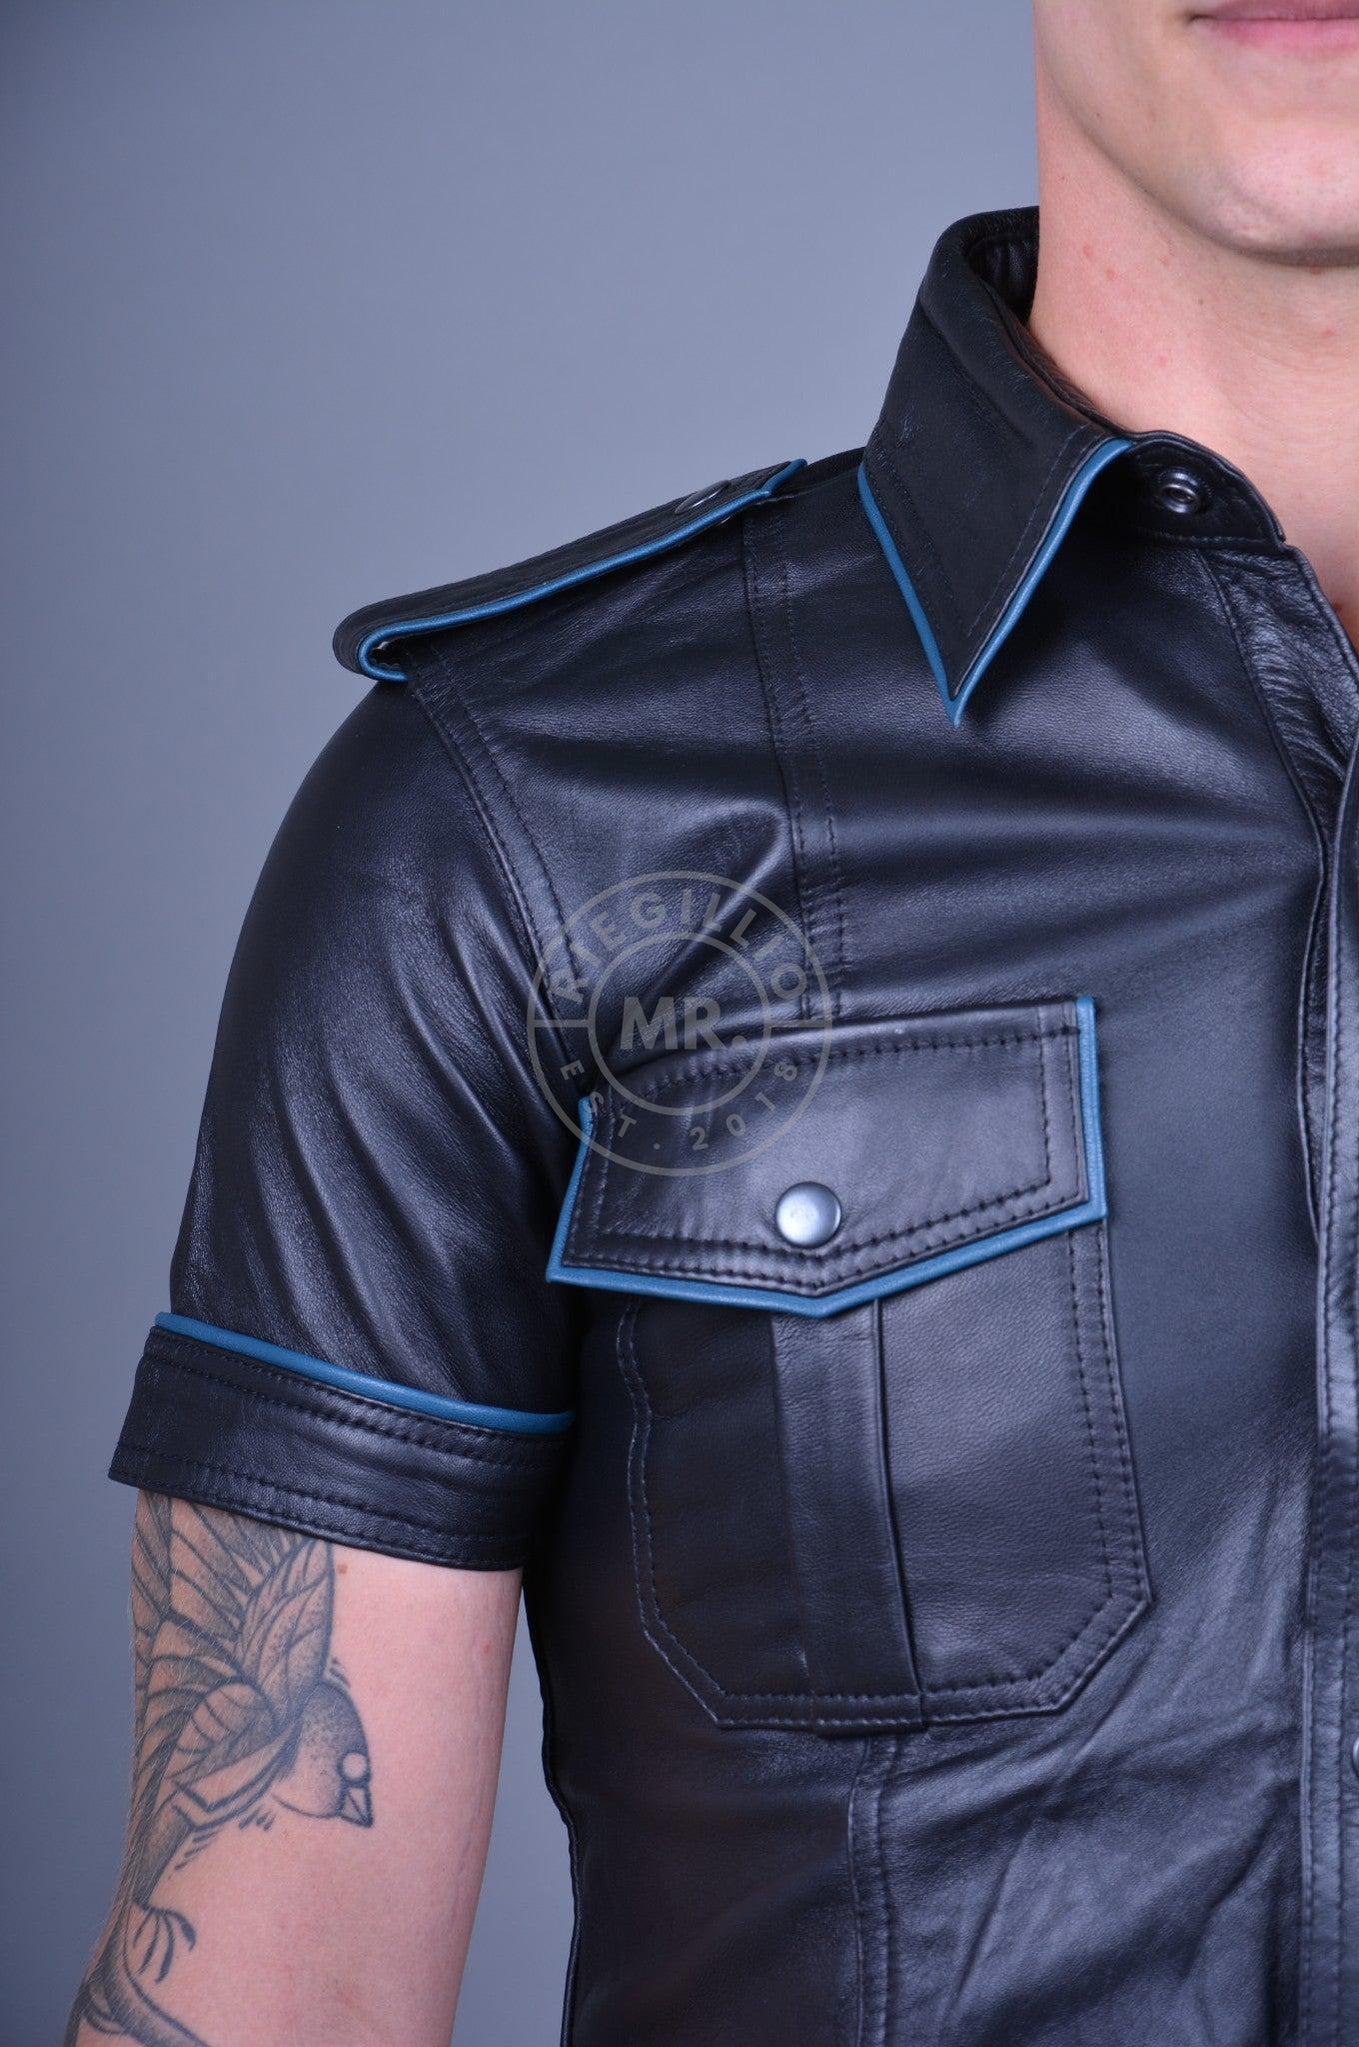 Black Leather Shirt - JEANS BLUE Piping at MR. Riegillio